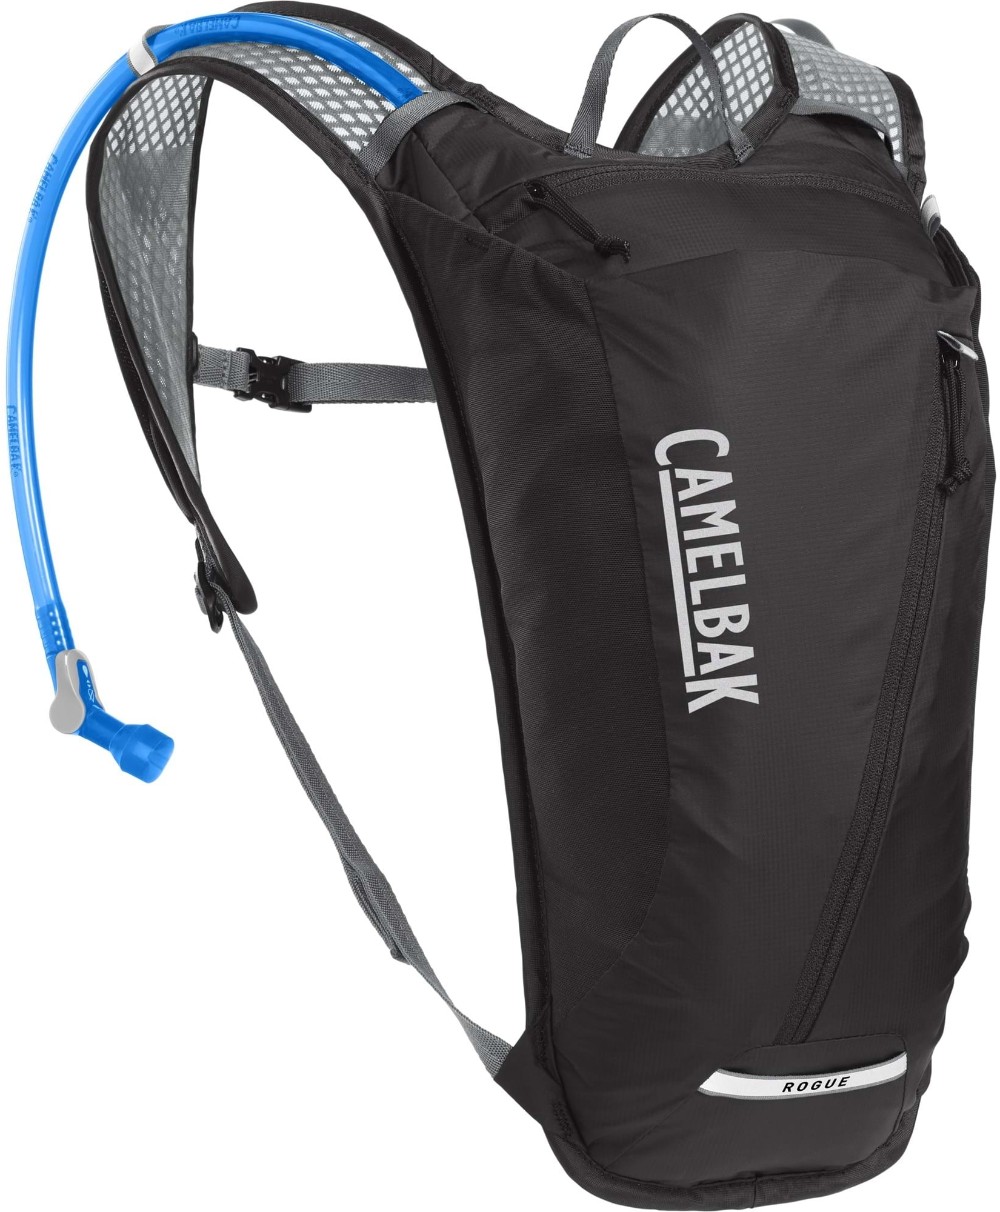 Rogue Light 7L Hydration Pack with 2L Reservoir image 0